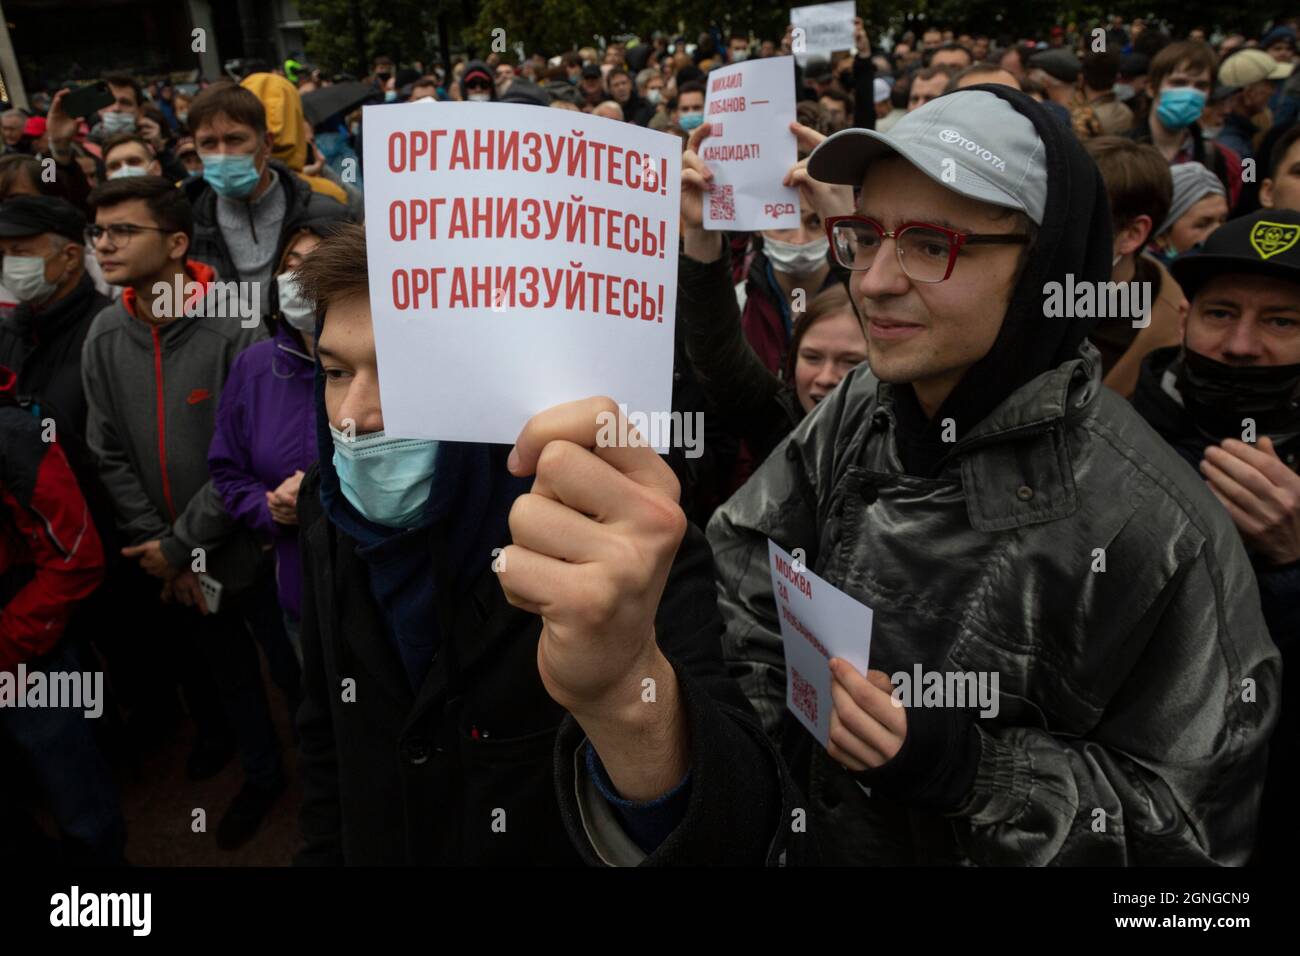 Moscow, Russia. 25th of September, 2021 Participants hold placards during an opposition rally to protest against the results of the Russian parliamentary election in Moscow, Russia. The poster reads 'Organize yourself! Organize yourself! Organize yourself!' Stock Photo